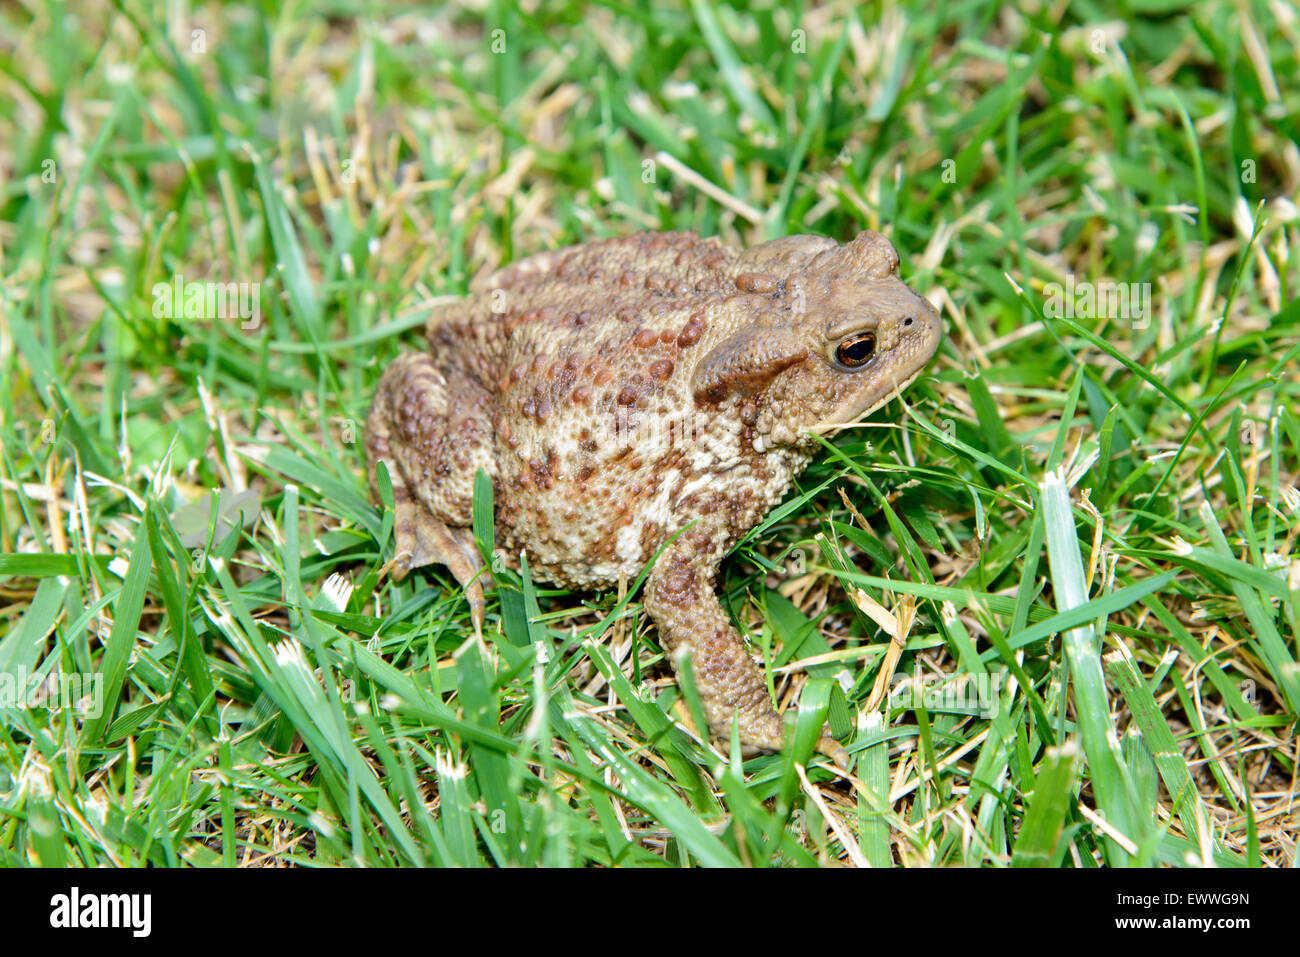 Closeup of an European common toad, bufo bufo, sitting in the grass Stock Photo